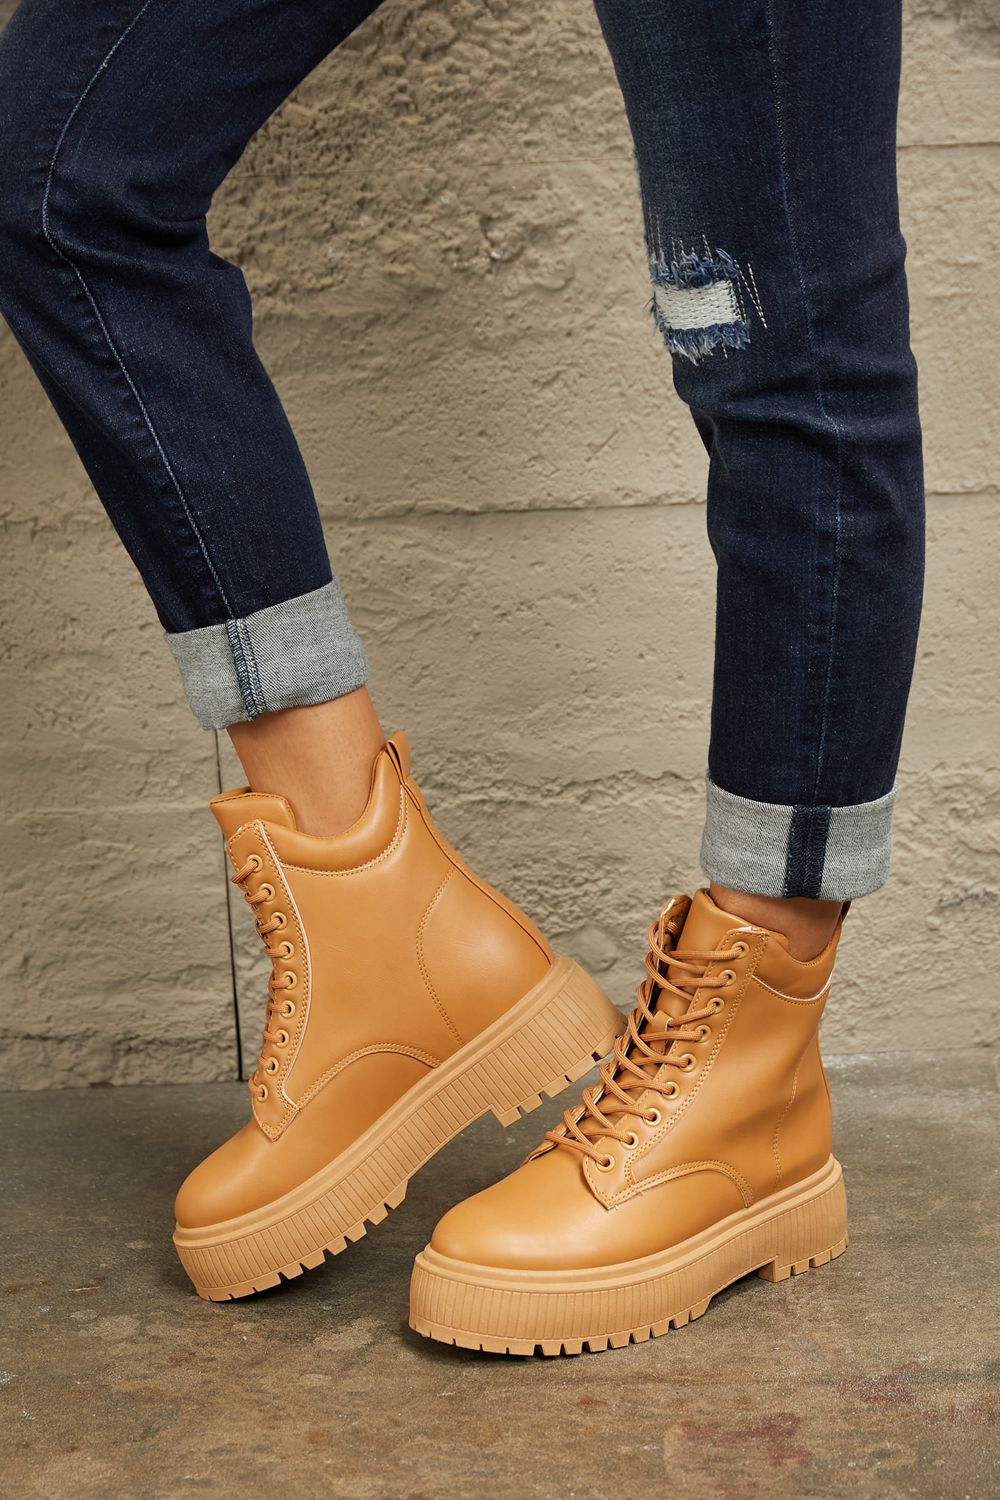 East Lion Corp Platform Combat Boots Print on any thing USA/STOD clothes